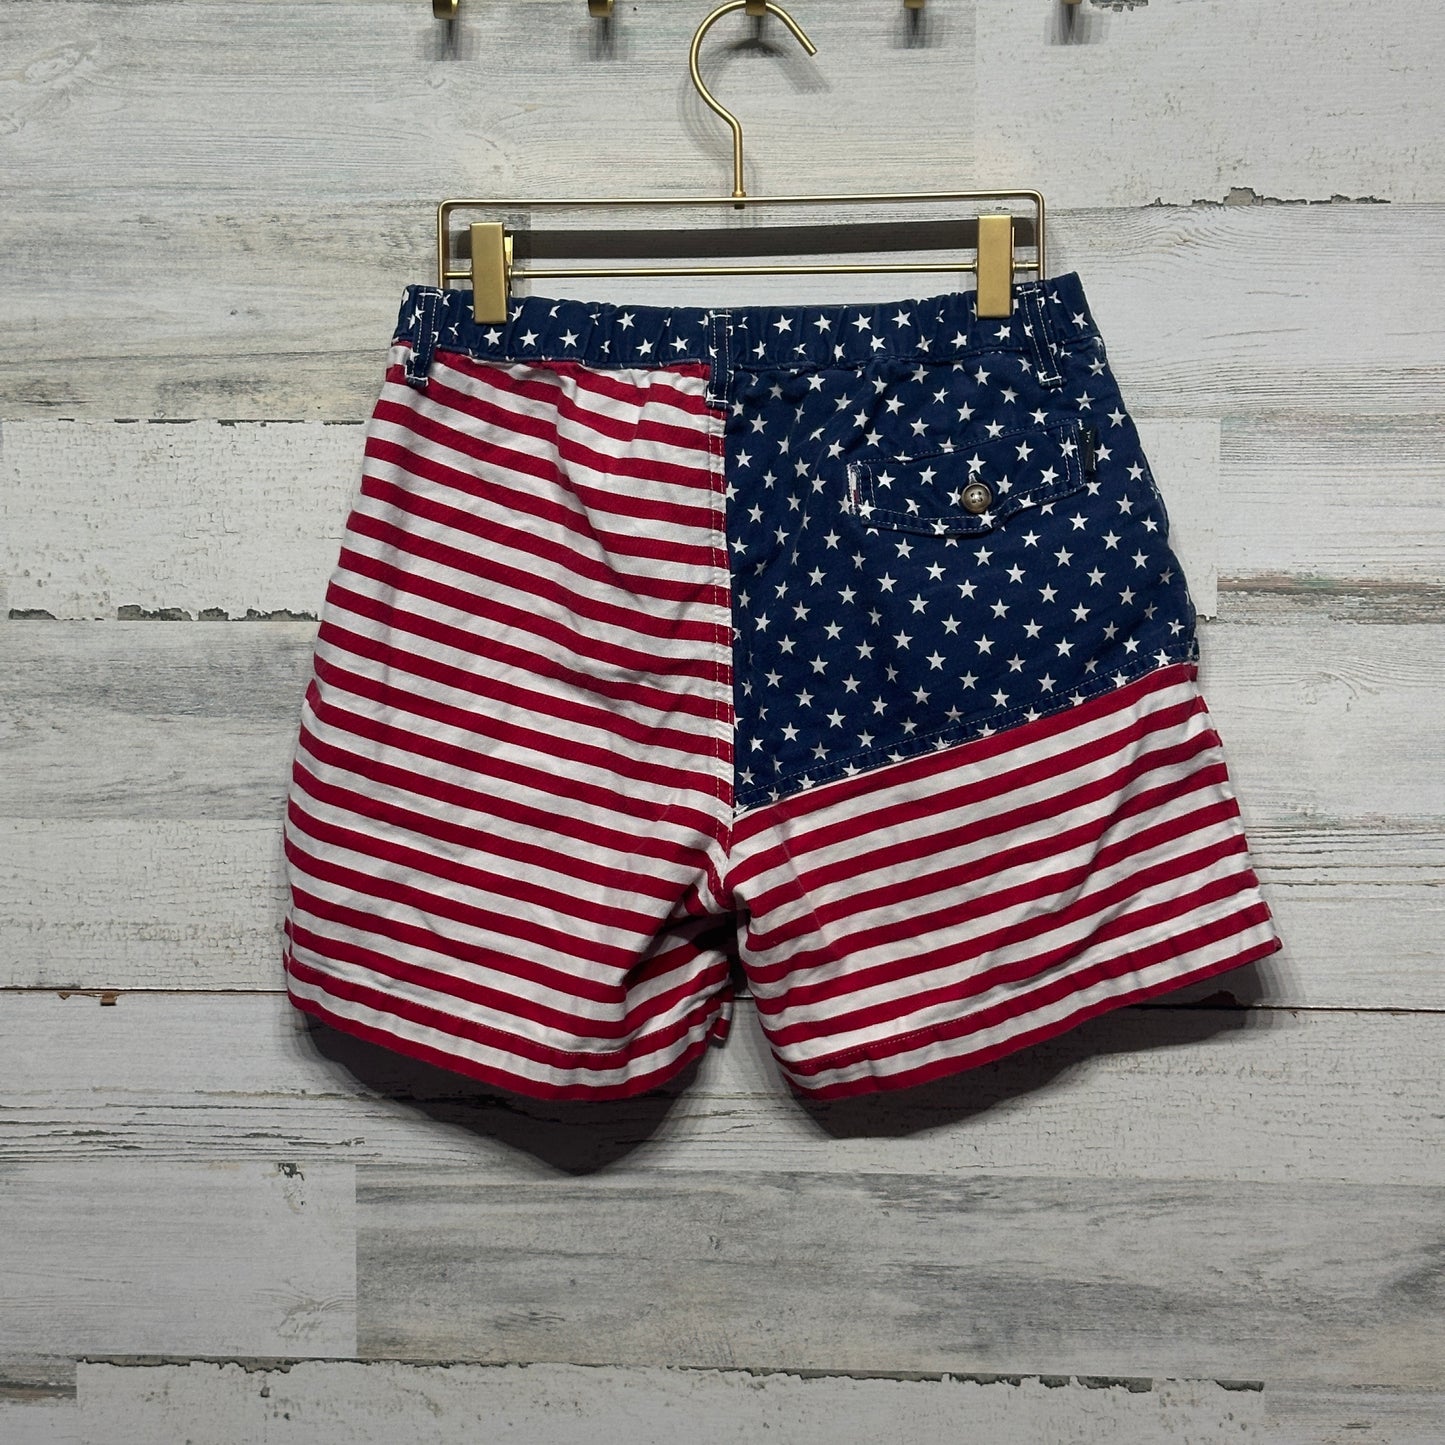 Men's Size Medium Chubbies Red White and Blue Shorts - Good Used Condition